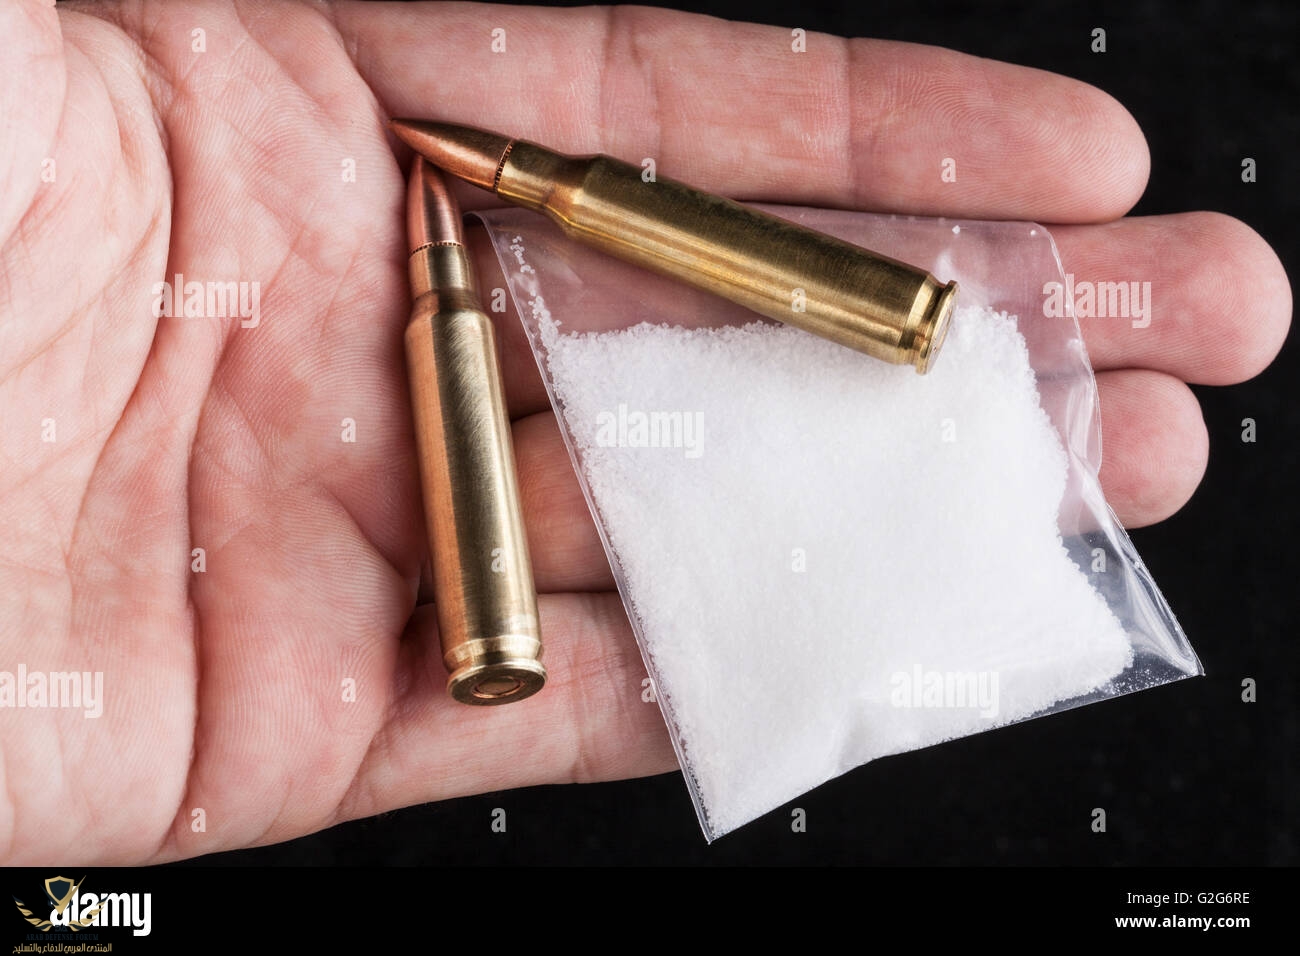 rifle-bullets-close-up-in-hand-on-black-background-with-a-bag-of-white-G2G6RE.jpg